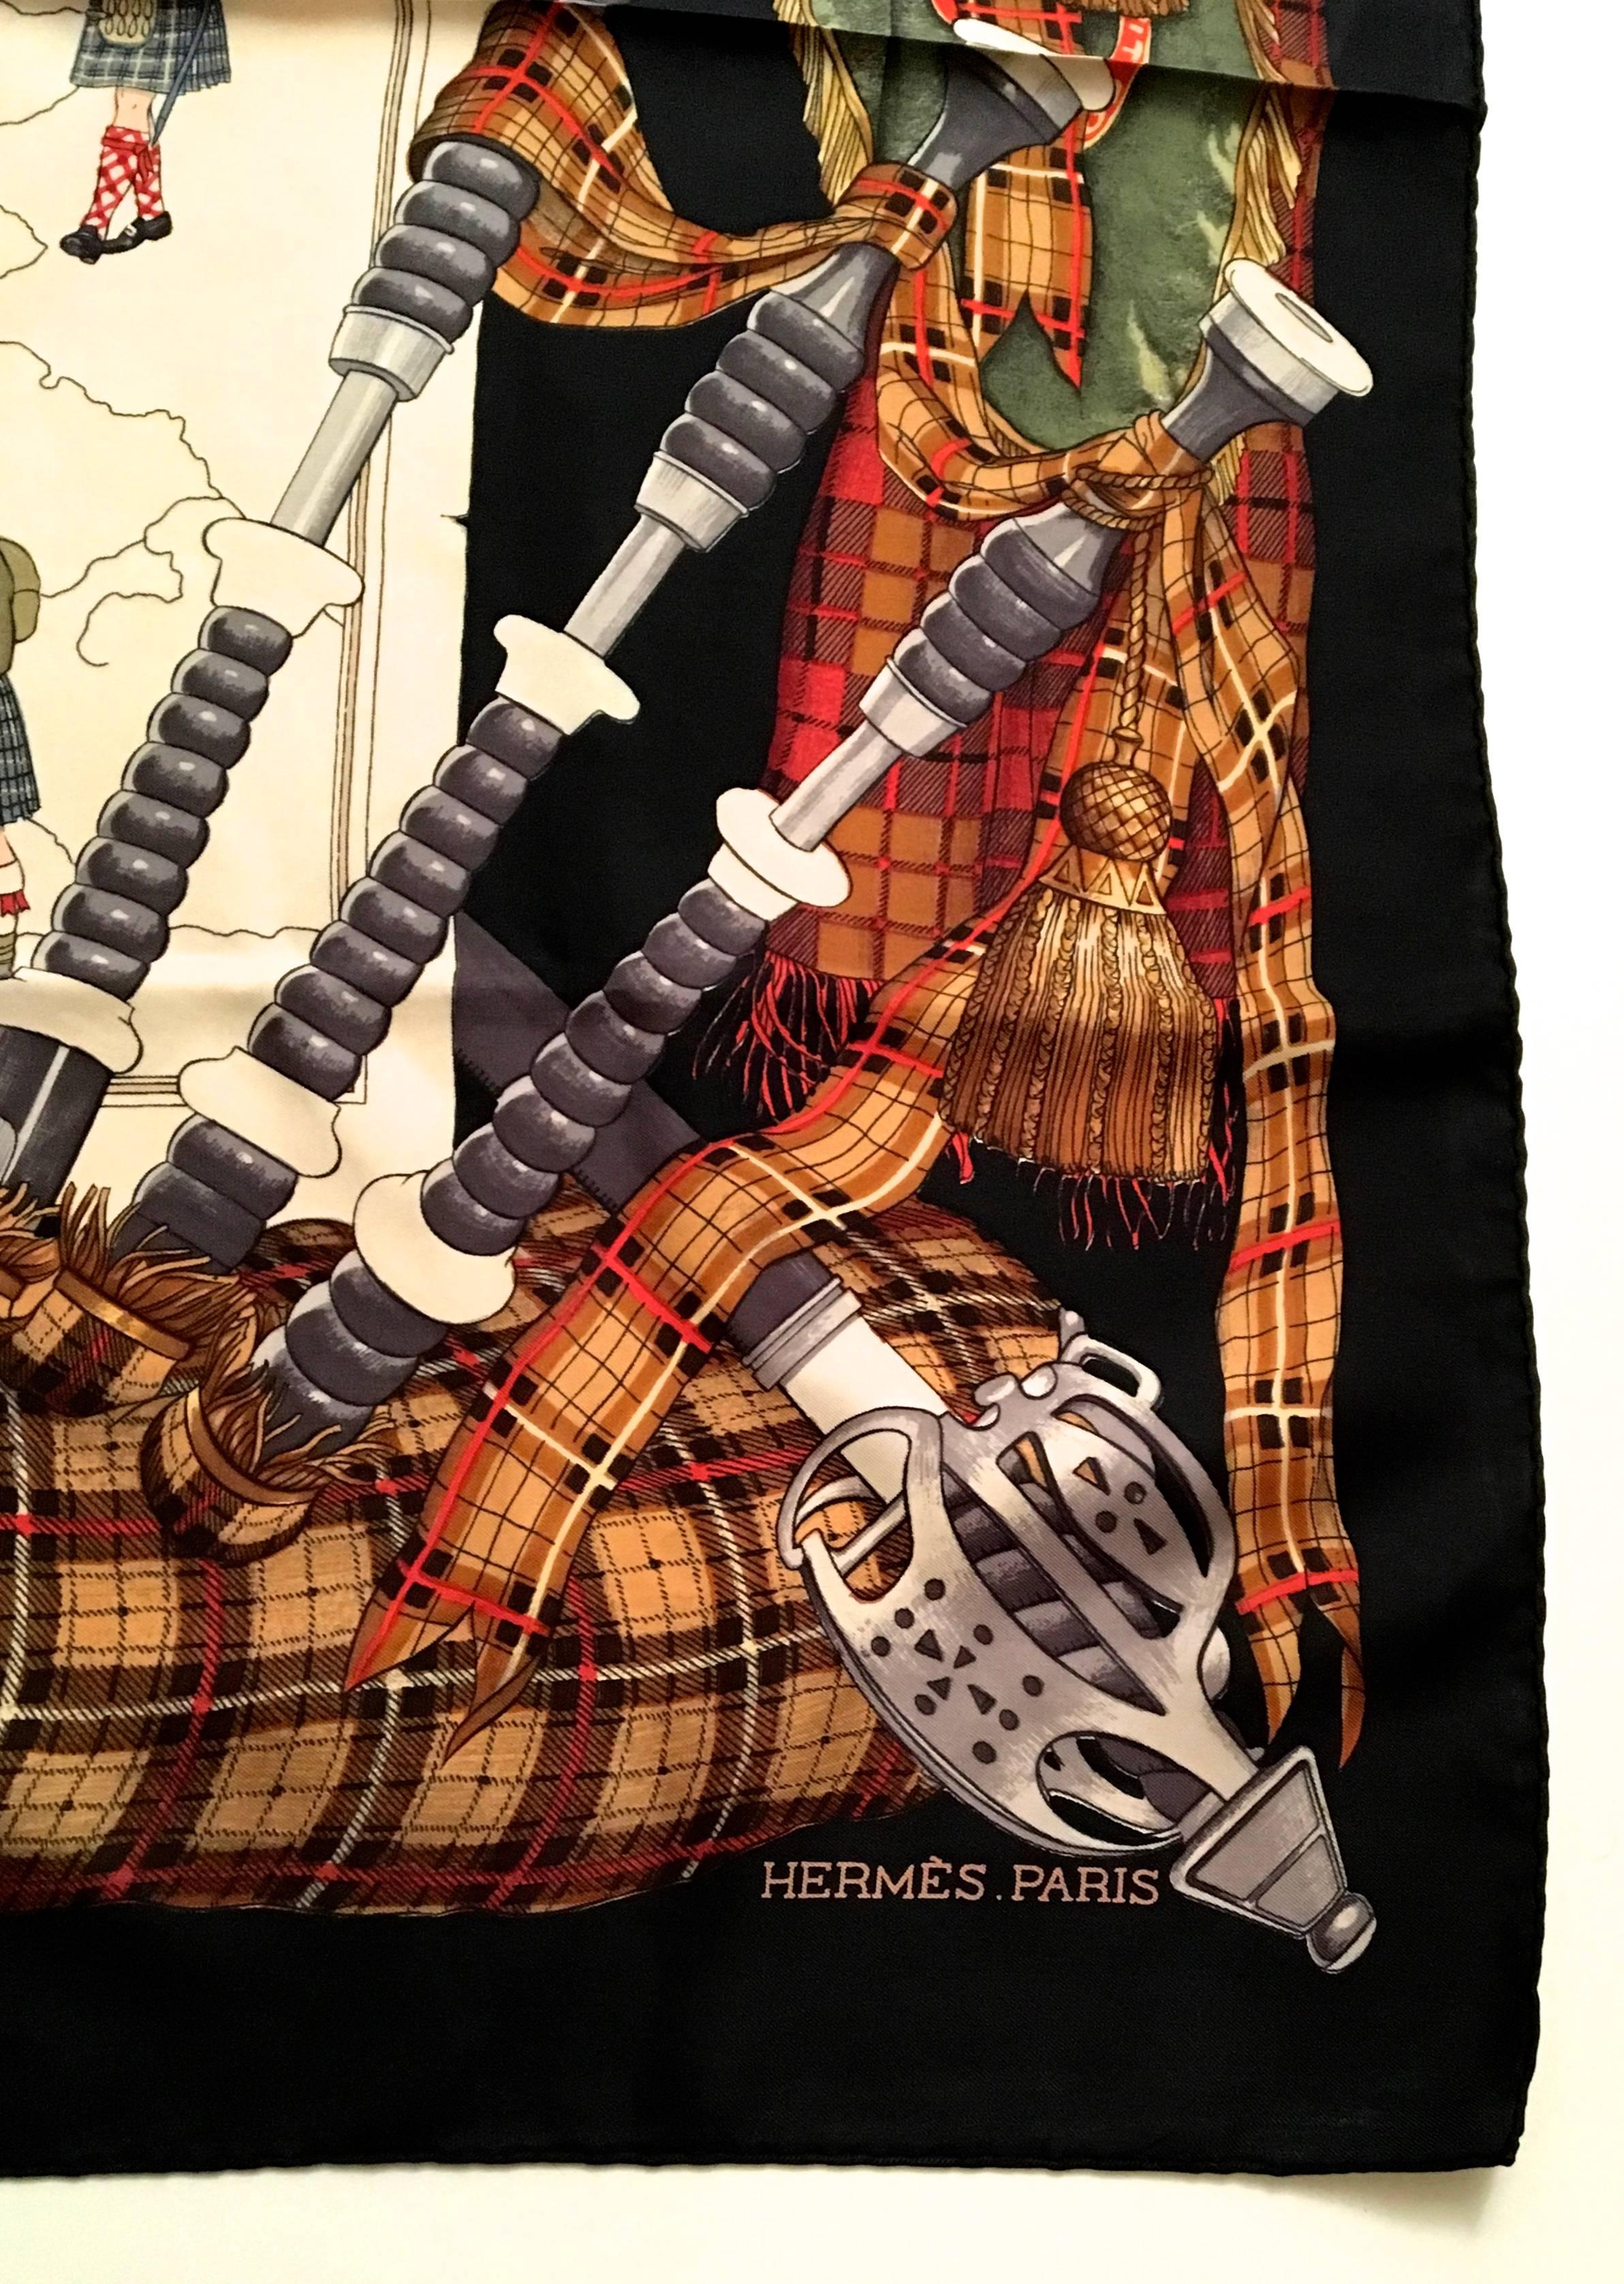 Presented here is a silk scarf from Hermes Paris. This beautiful scarf is a design featuring the country of Scotland and its heritage. The scarf has bagpipes along the border and a map of the country of Scotland in the center. There are images of